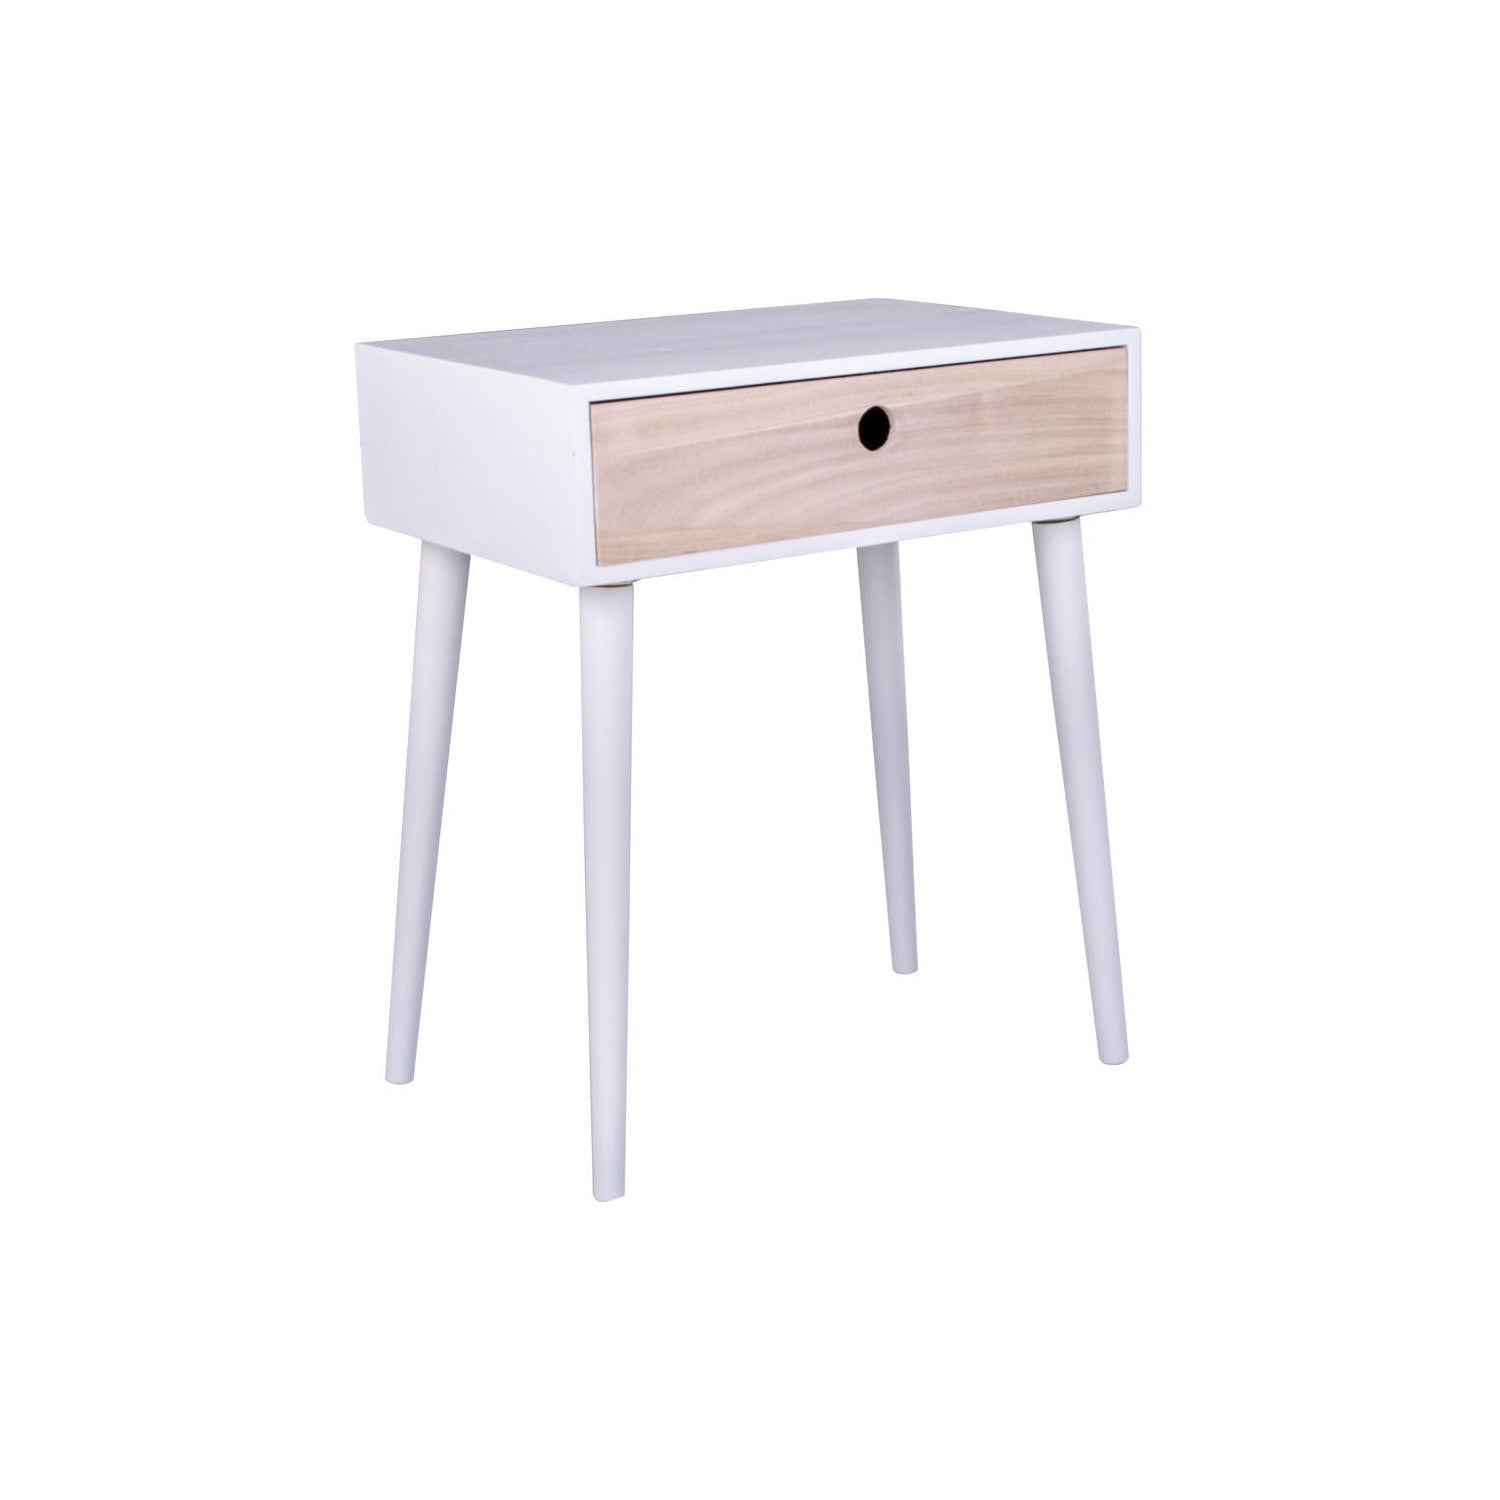 House Nordic Parma Bedside Table